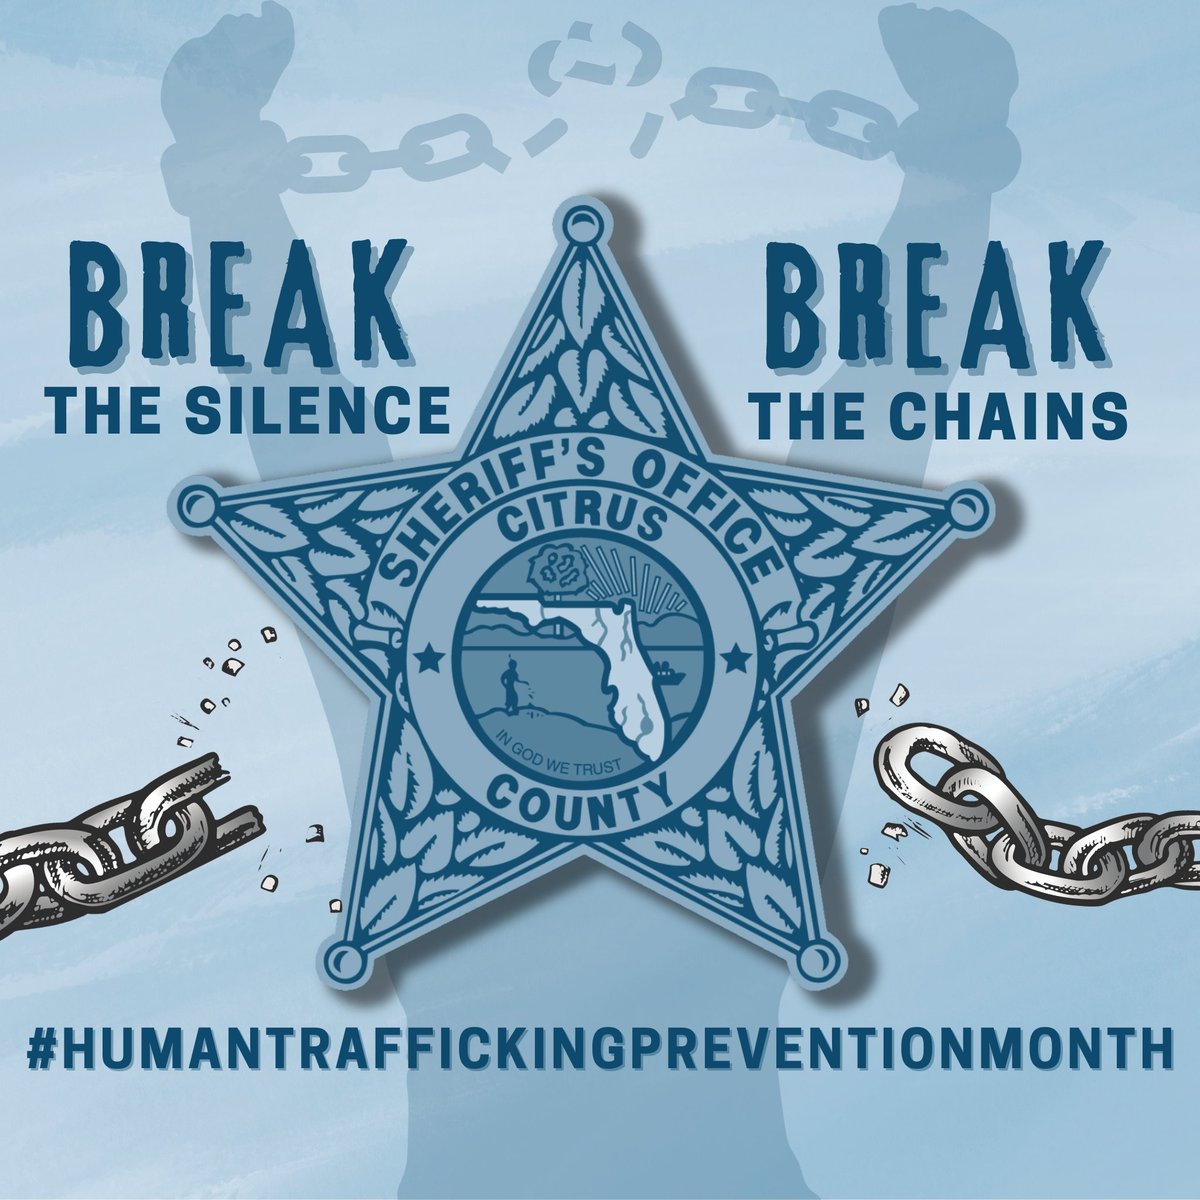 CCSO INTRODUCES “BREAK THE CHAINS,” A HUMAN TRAFFICKING AWARENESS CAMPAIGN

#HumanTraffickingPrevention #CCSOeducating #CCSOProtecting 
1726